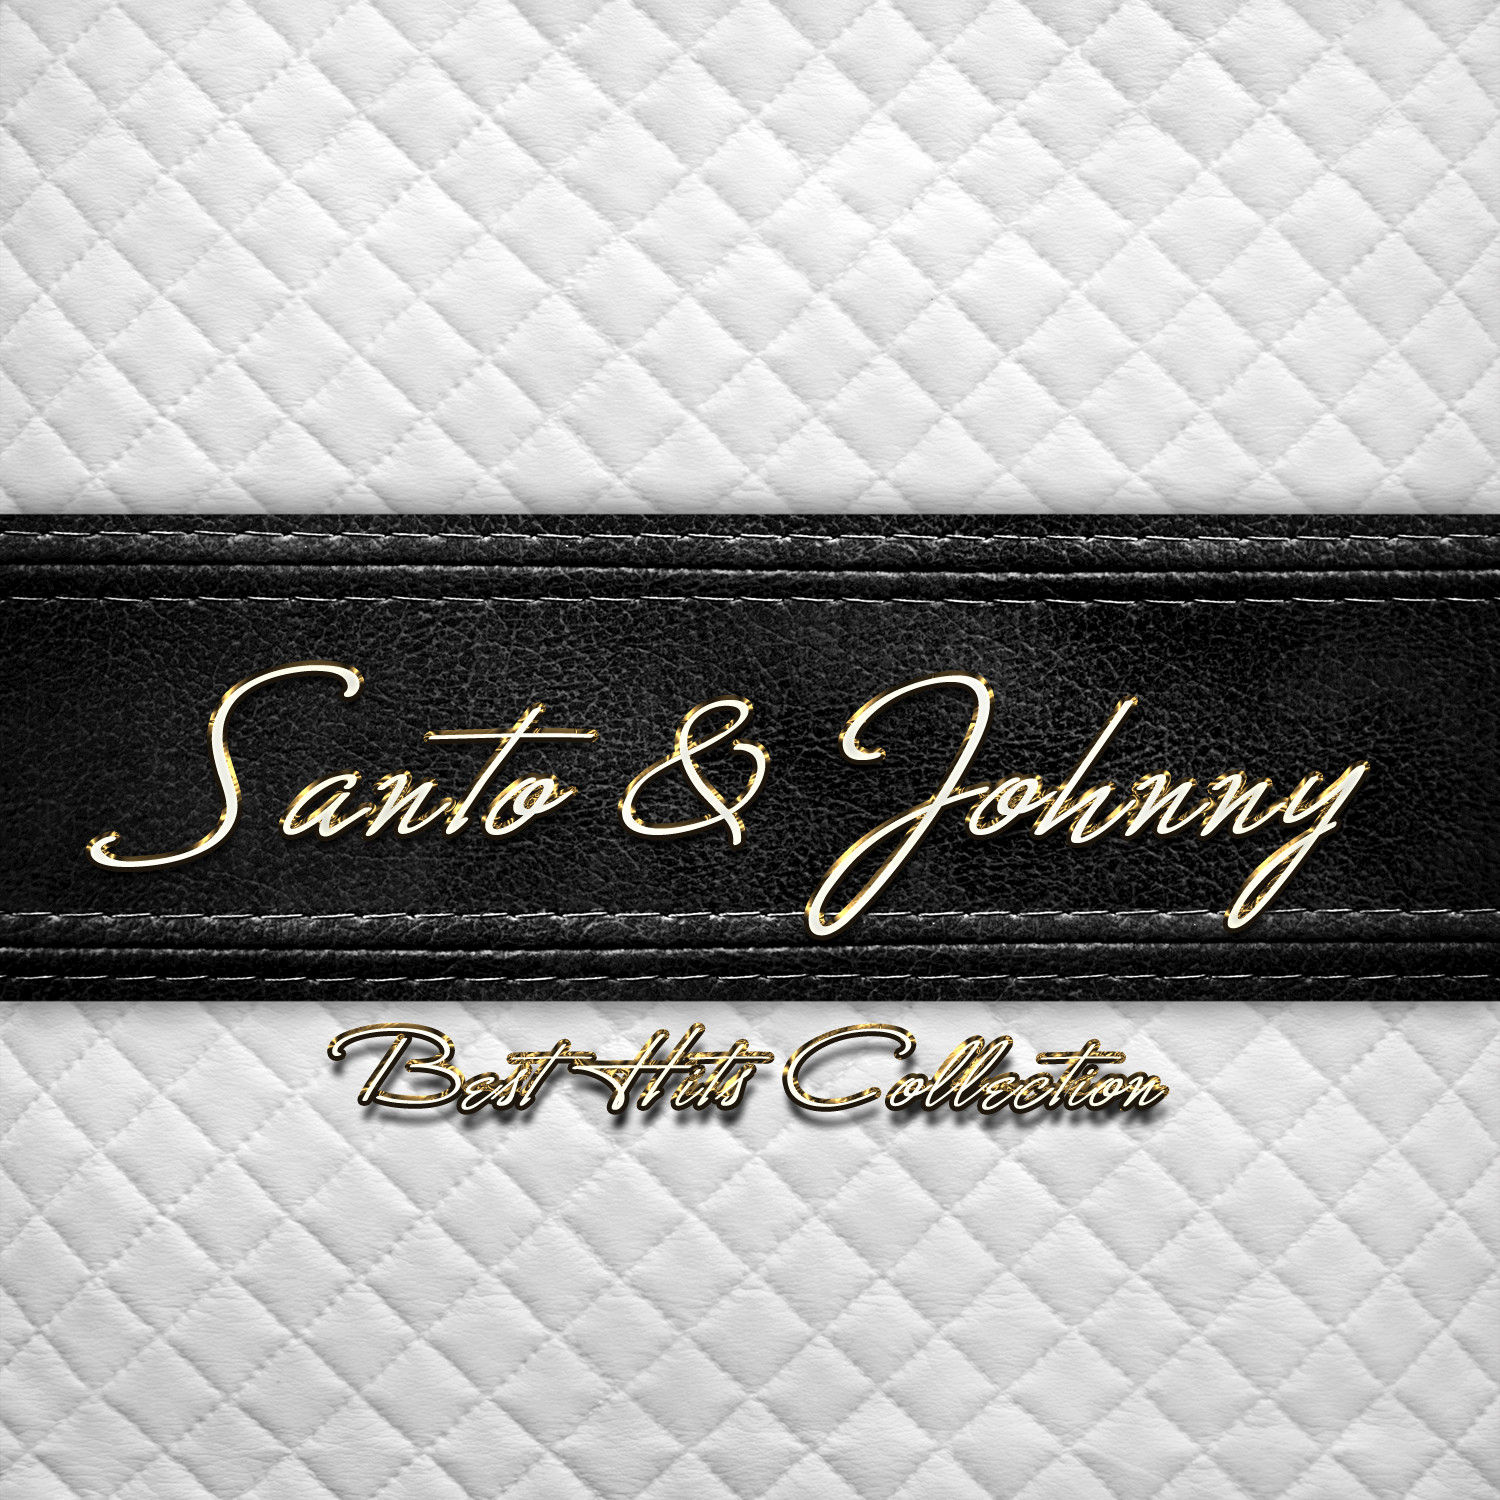 Best Hits Collection of Santo & Johnny